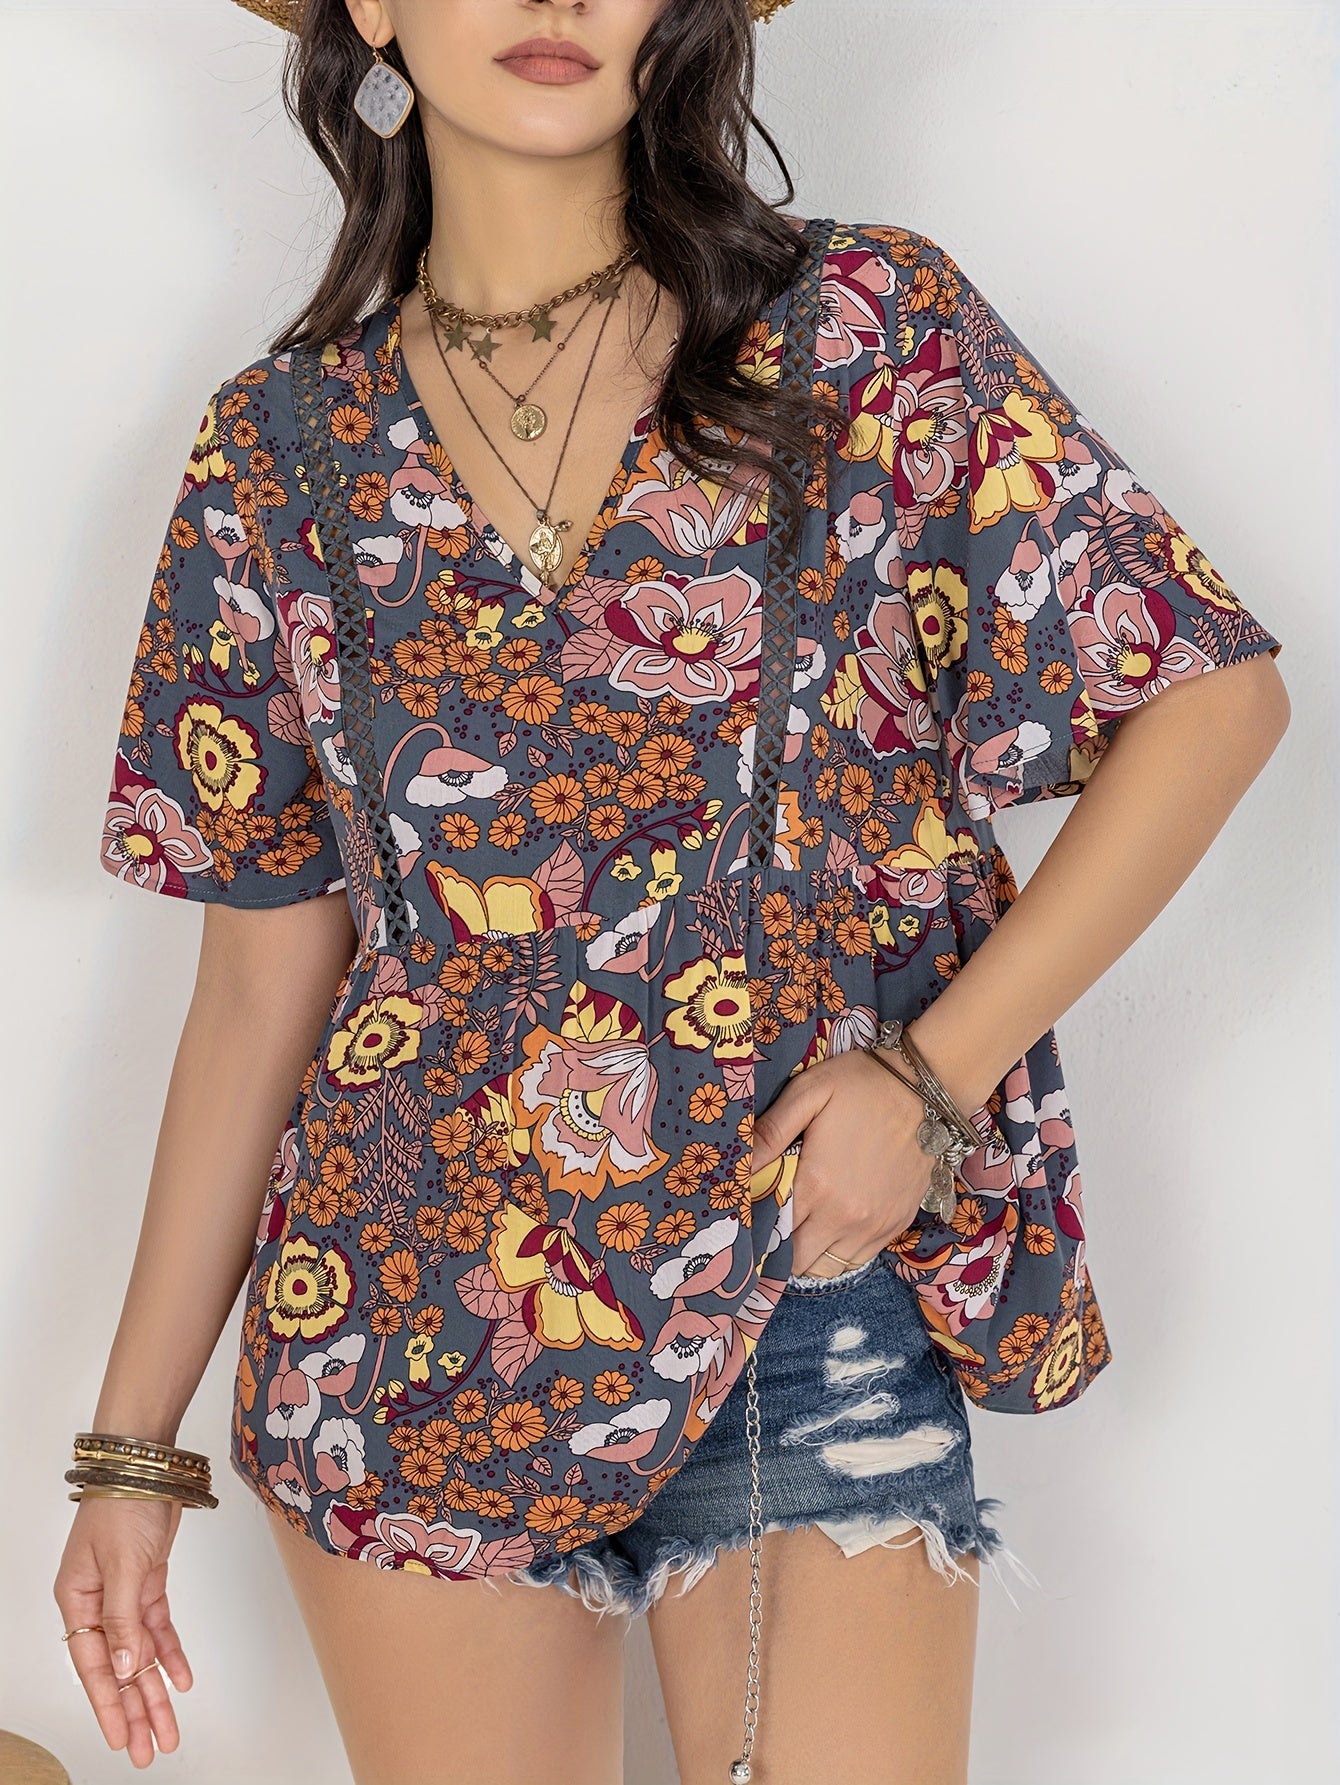 Bohemian Floral Print Short Ruffle Sleeve Tops For Spring and Summer, Women's Summer Tops